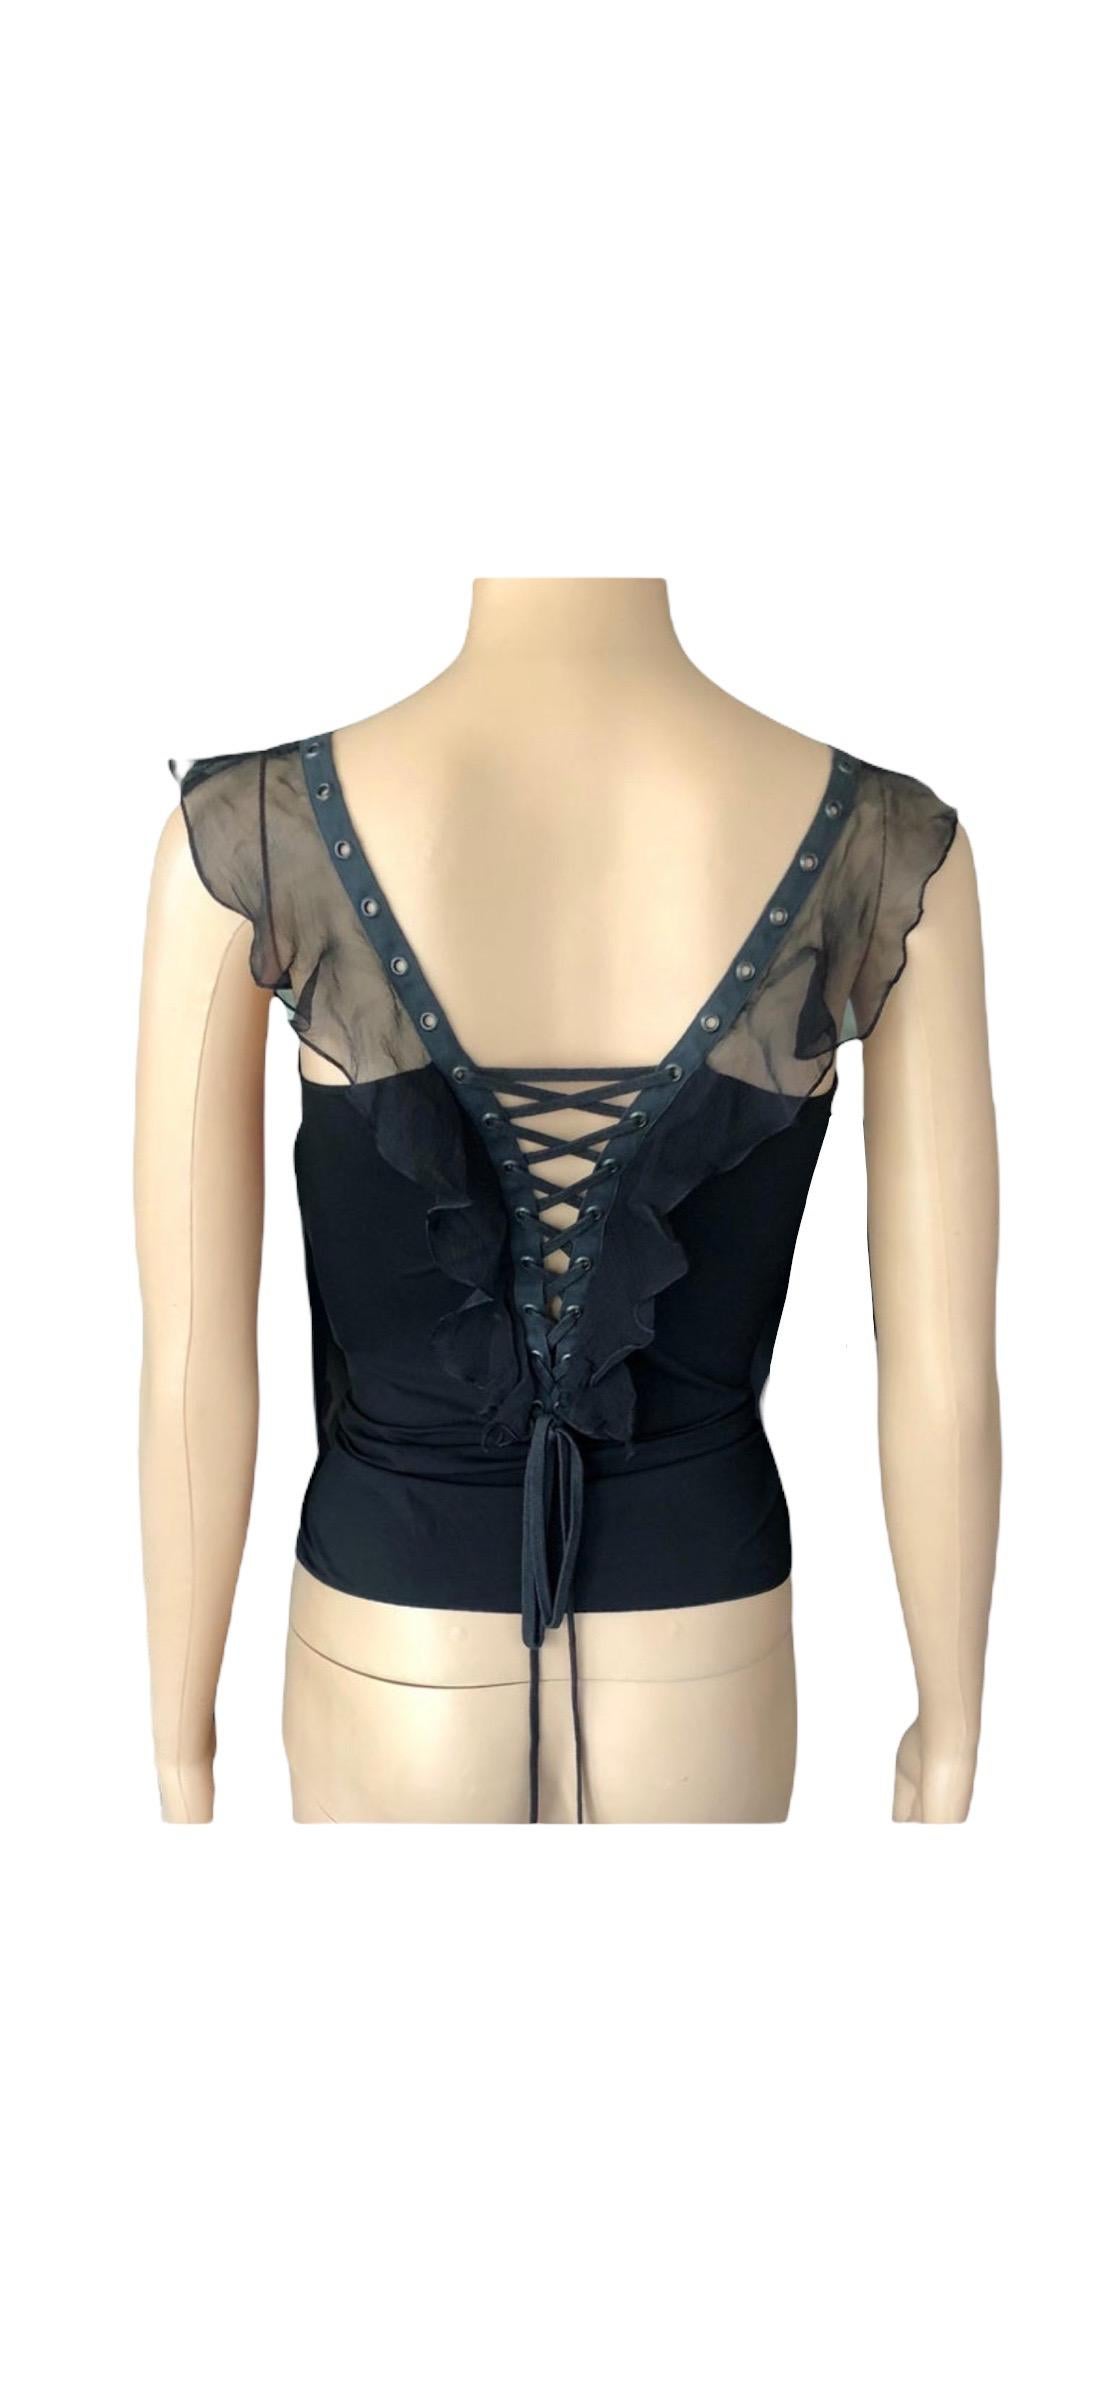 Christian Dior By John Galliano S/S 2003 Plunging Lace Up Tie Up Black Top For Sale 2